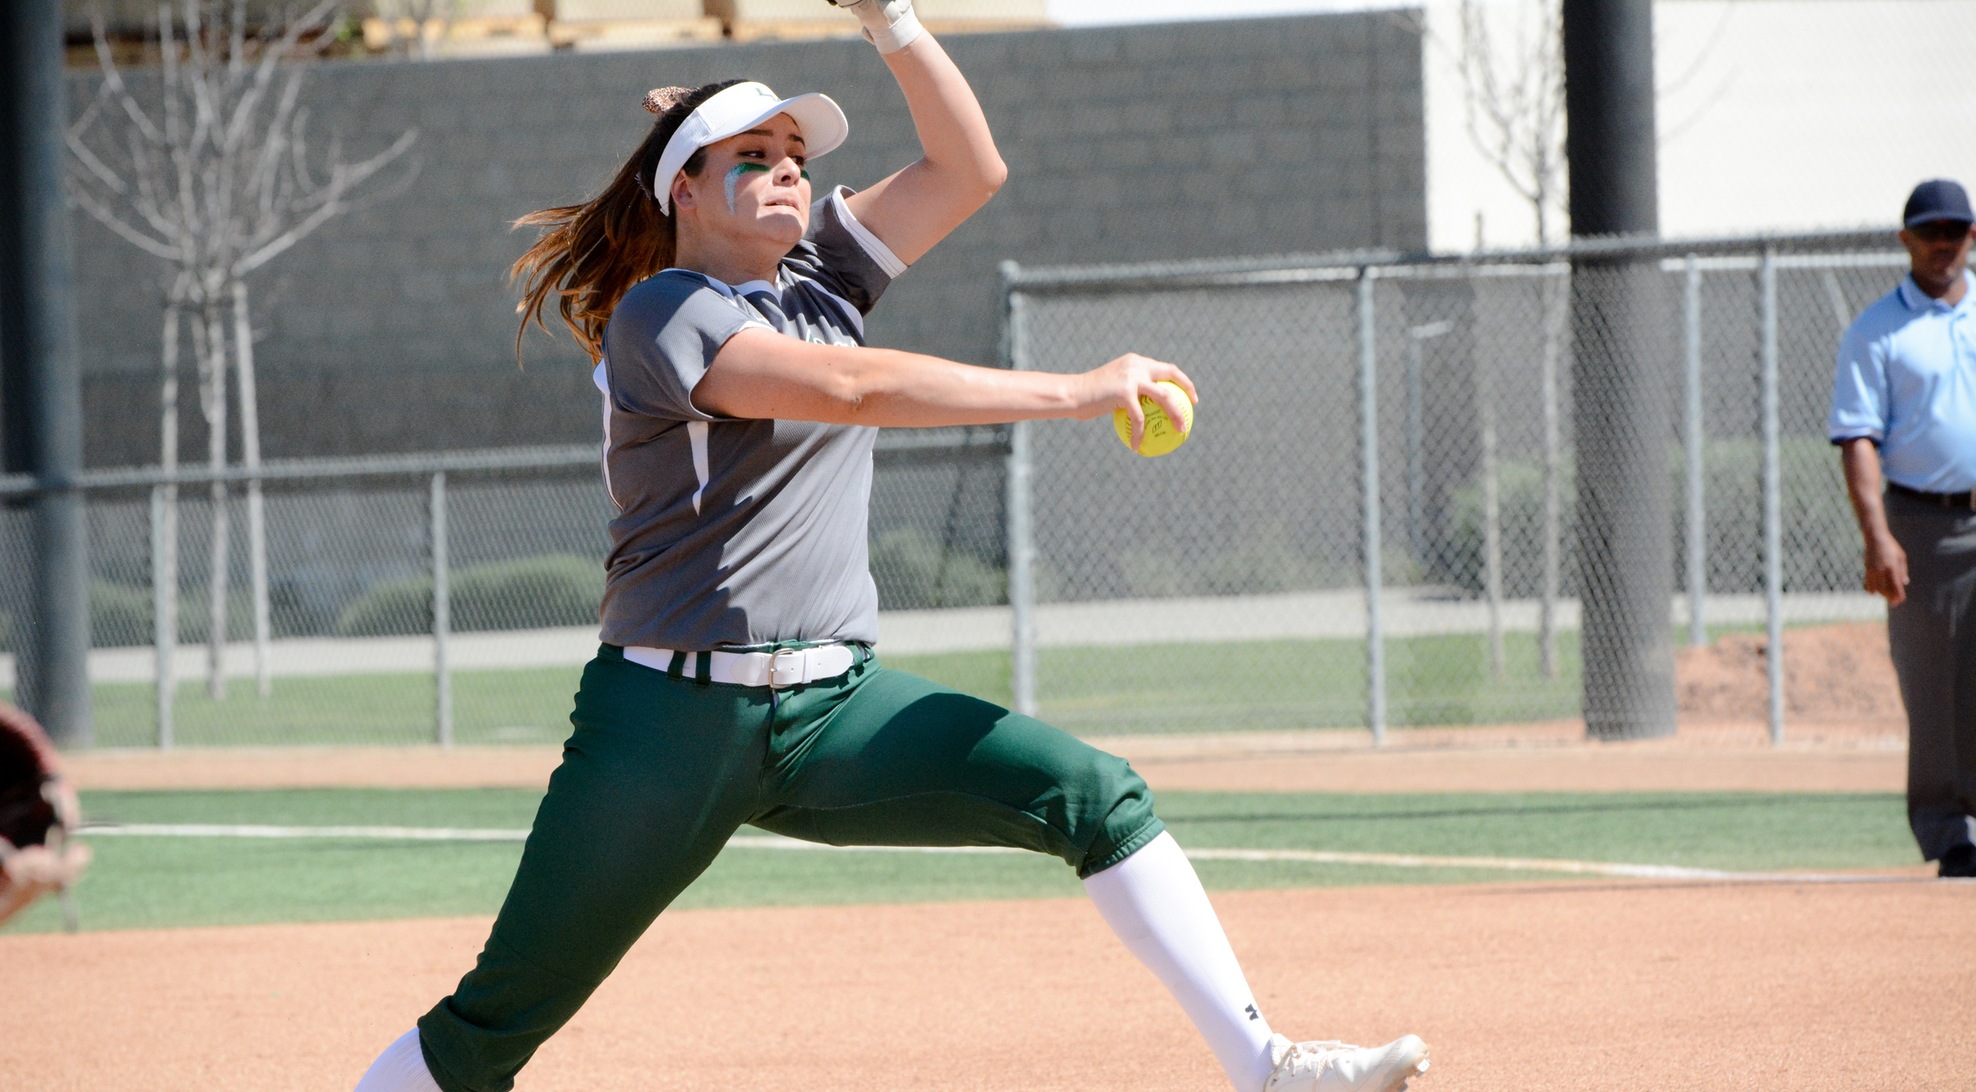 Ponce shuts out No. 25 Ithaca, La Verne earns split